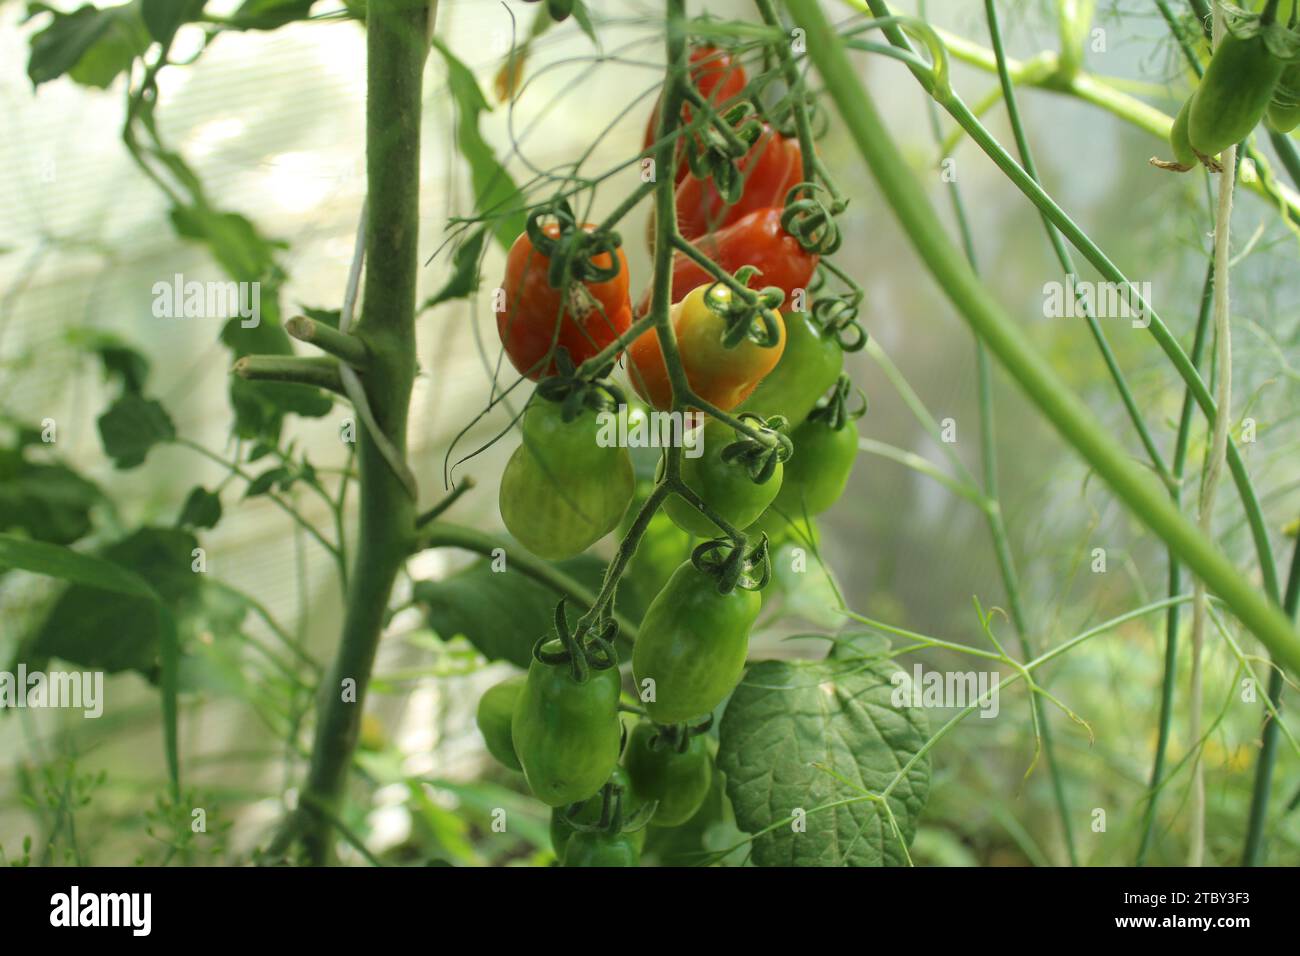 Tomatoes on a branch in a greenhouse. Breeding of new varieties of vegetables and tomatoes. Scientific Farming. Stock Photo